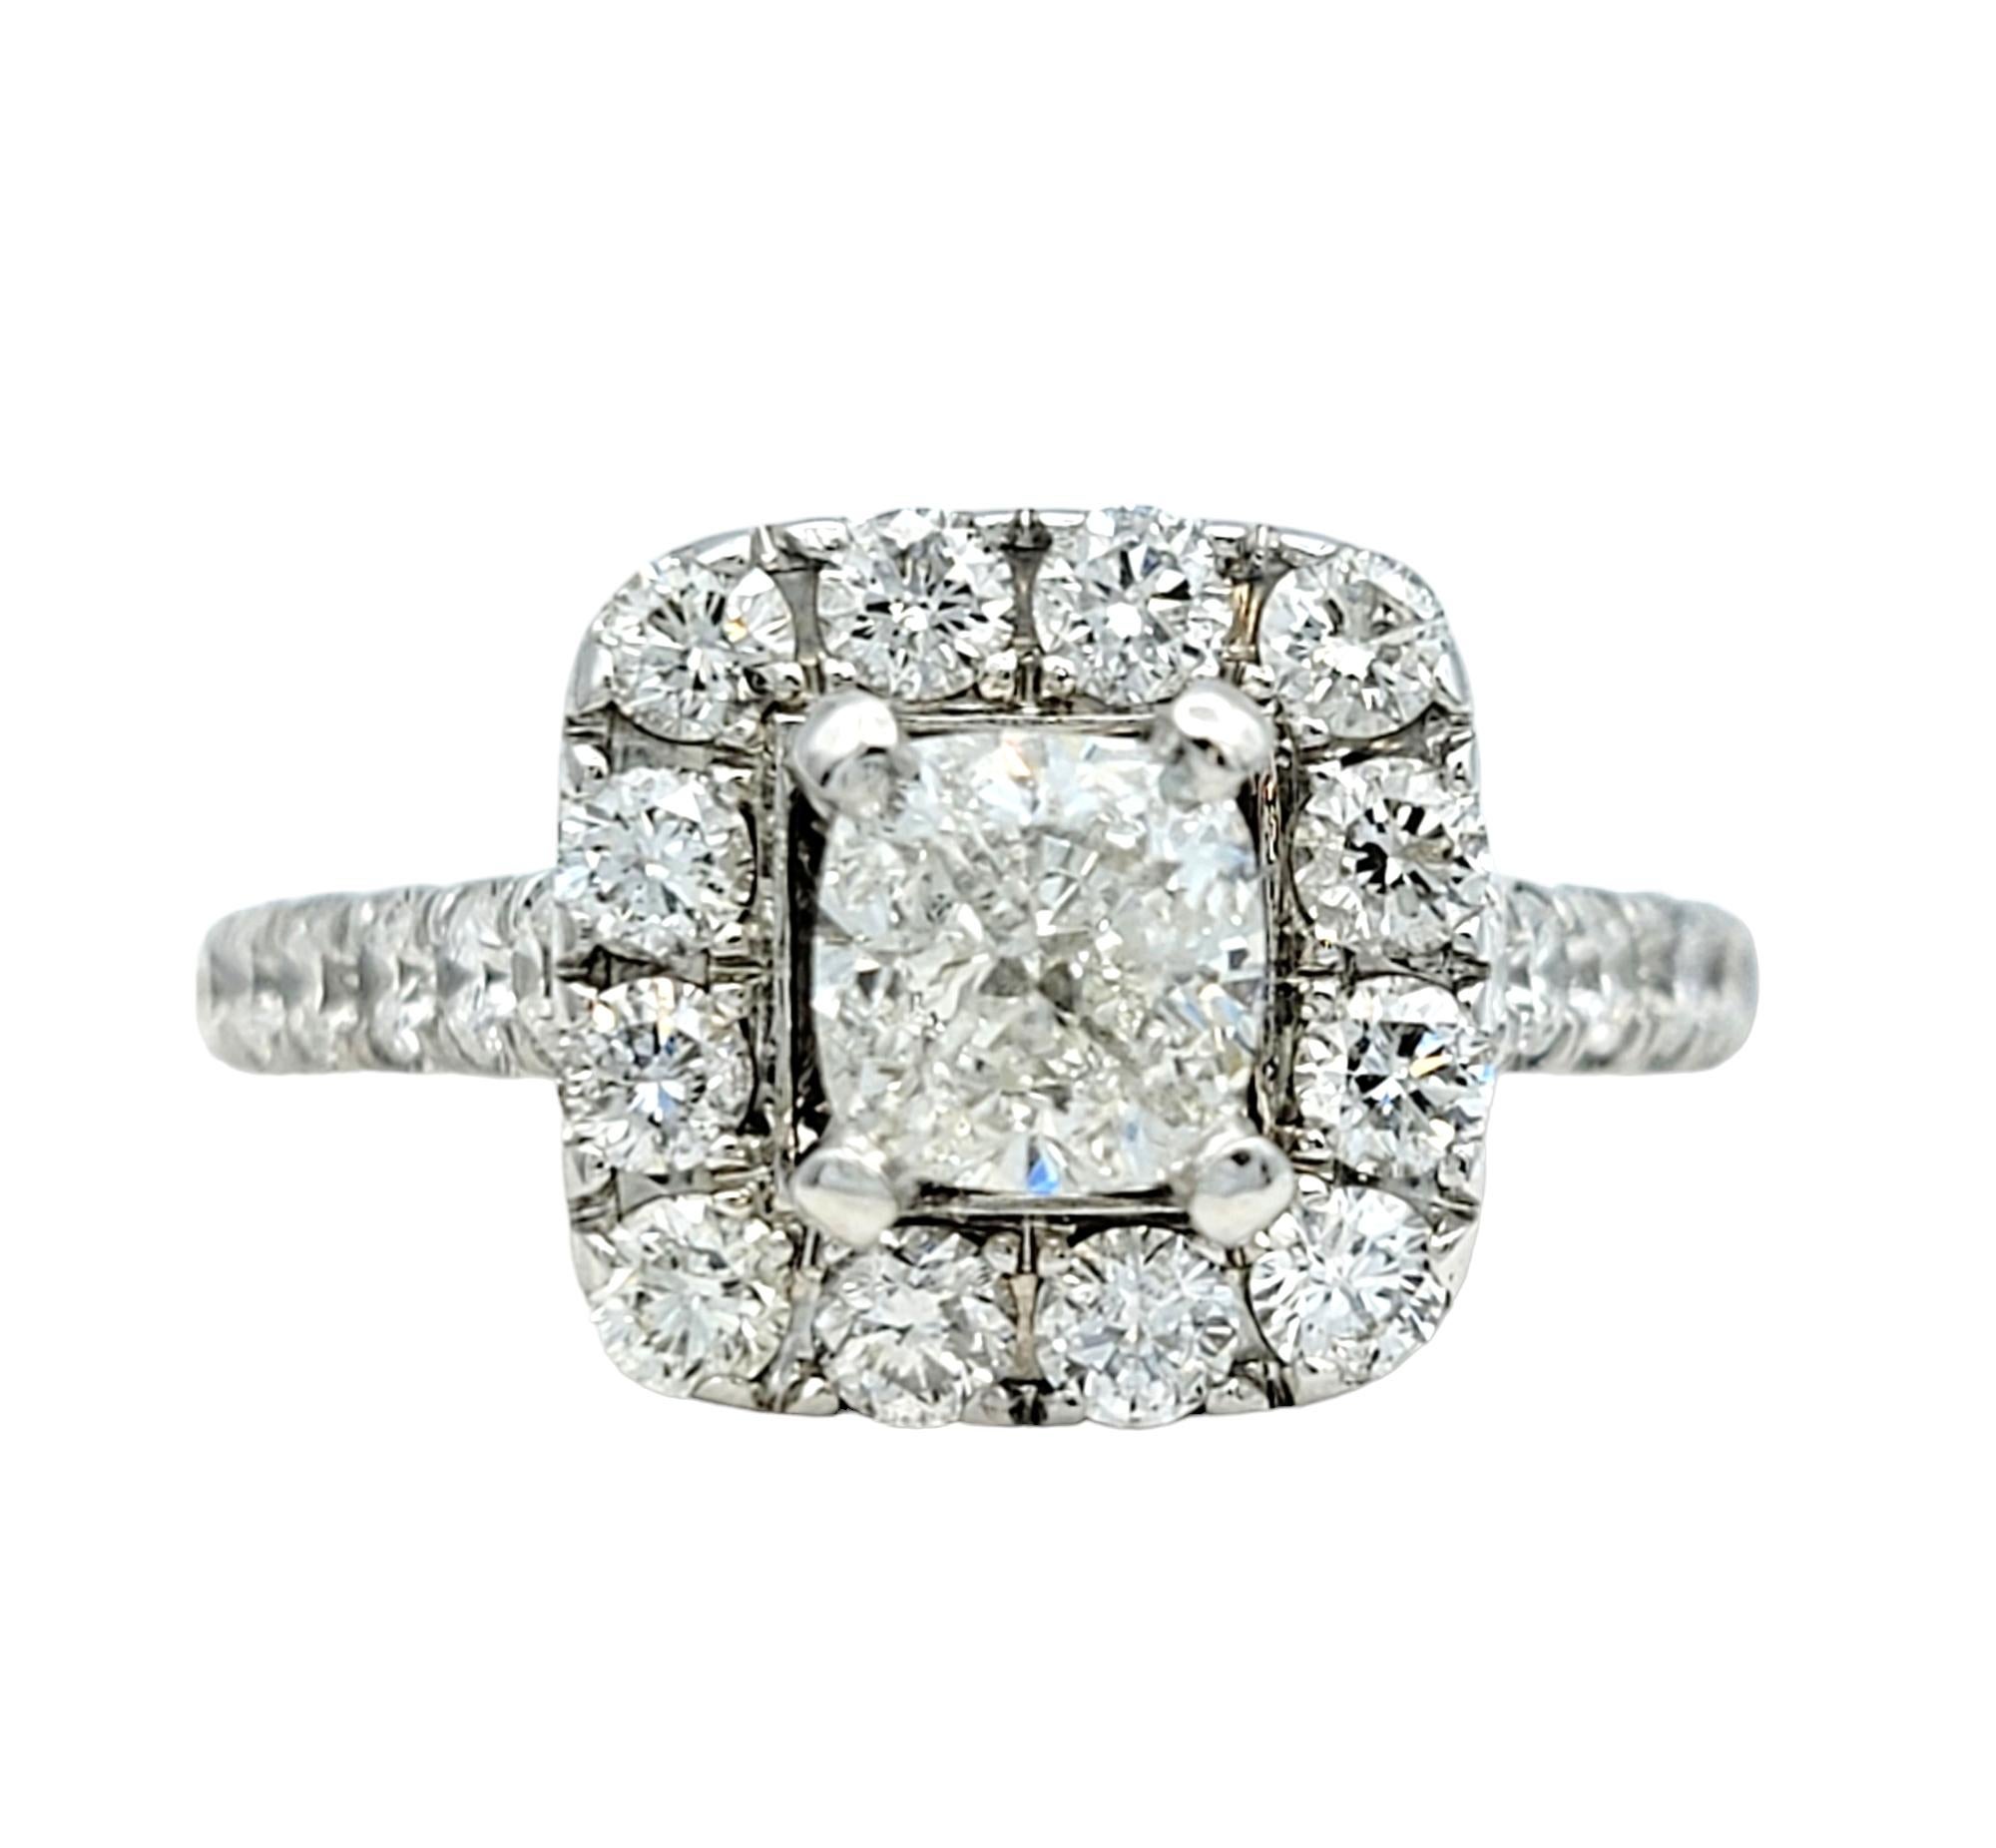 Neil Lane Cushion and Round Diamond Halo Engagement Ring in 14 Karat White Gold In Excellent Condition For Sale In Scottsdale, AZ